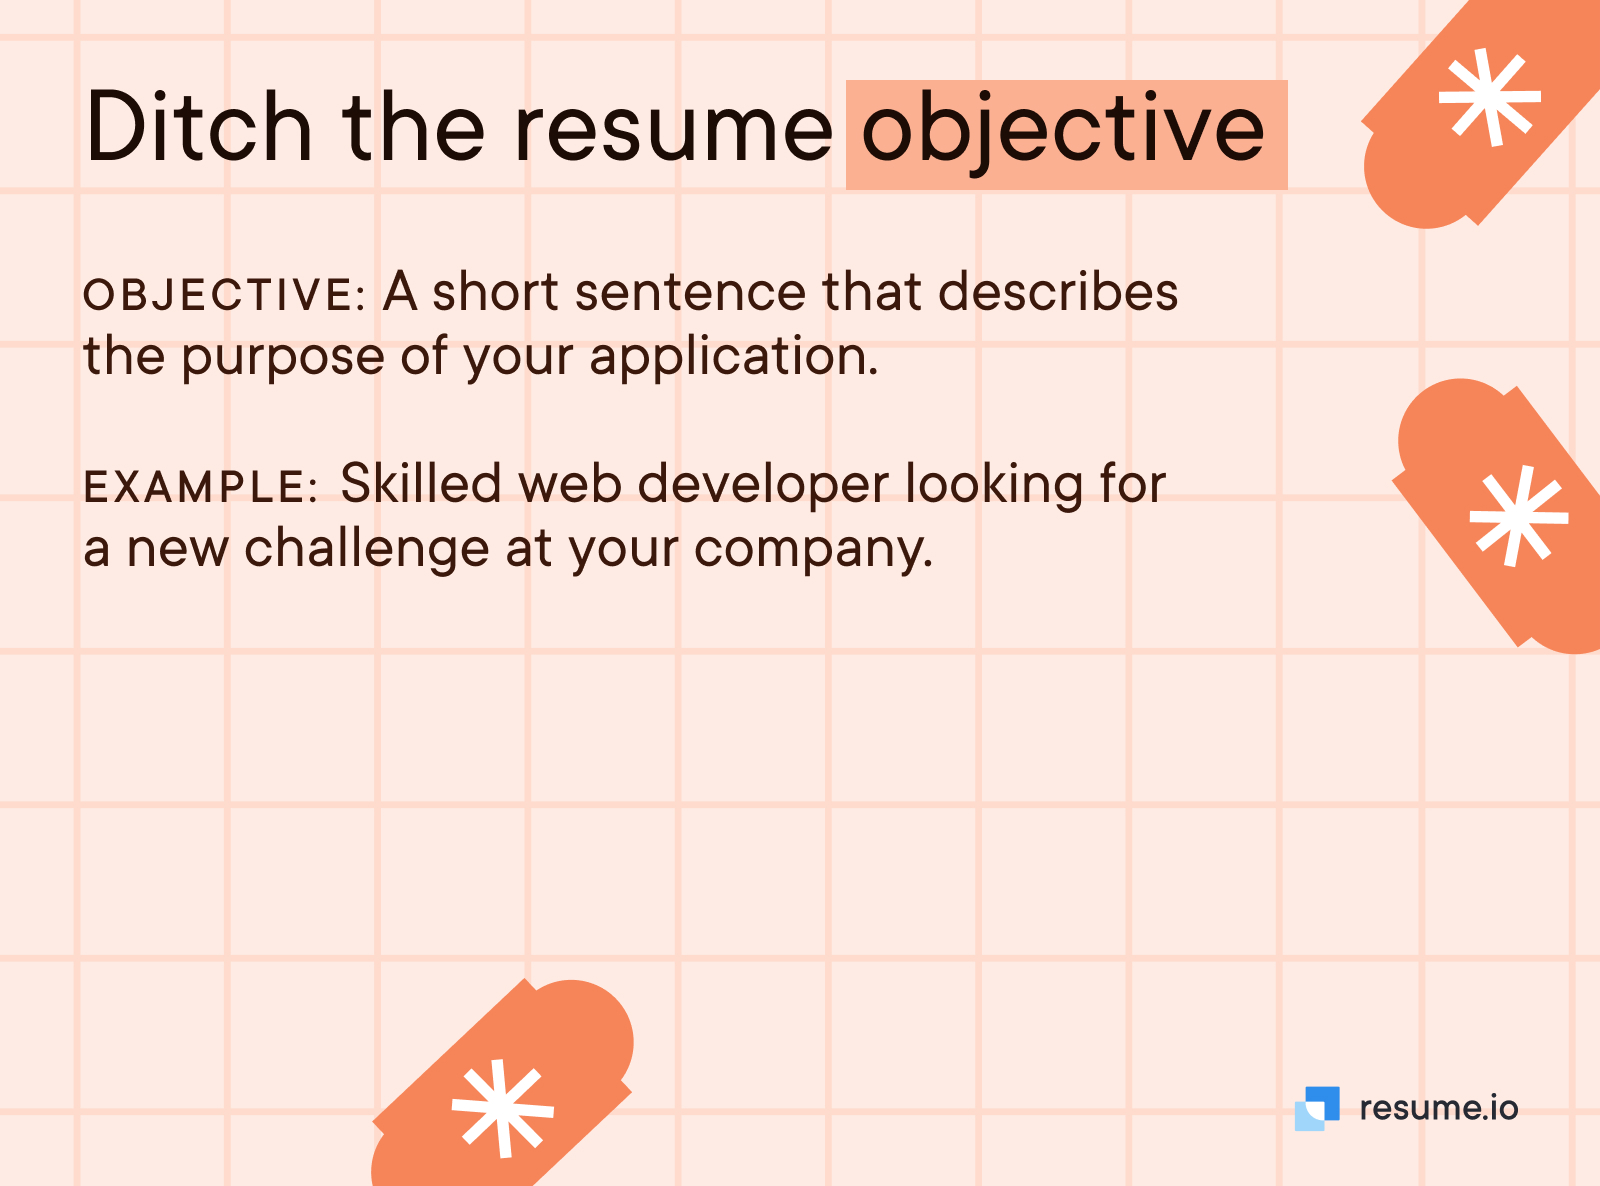 Ditch the resume objective